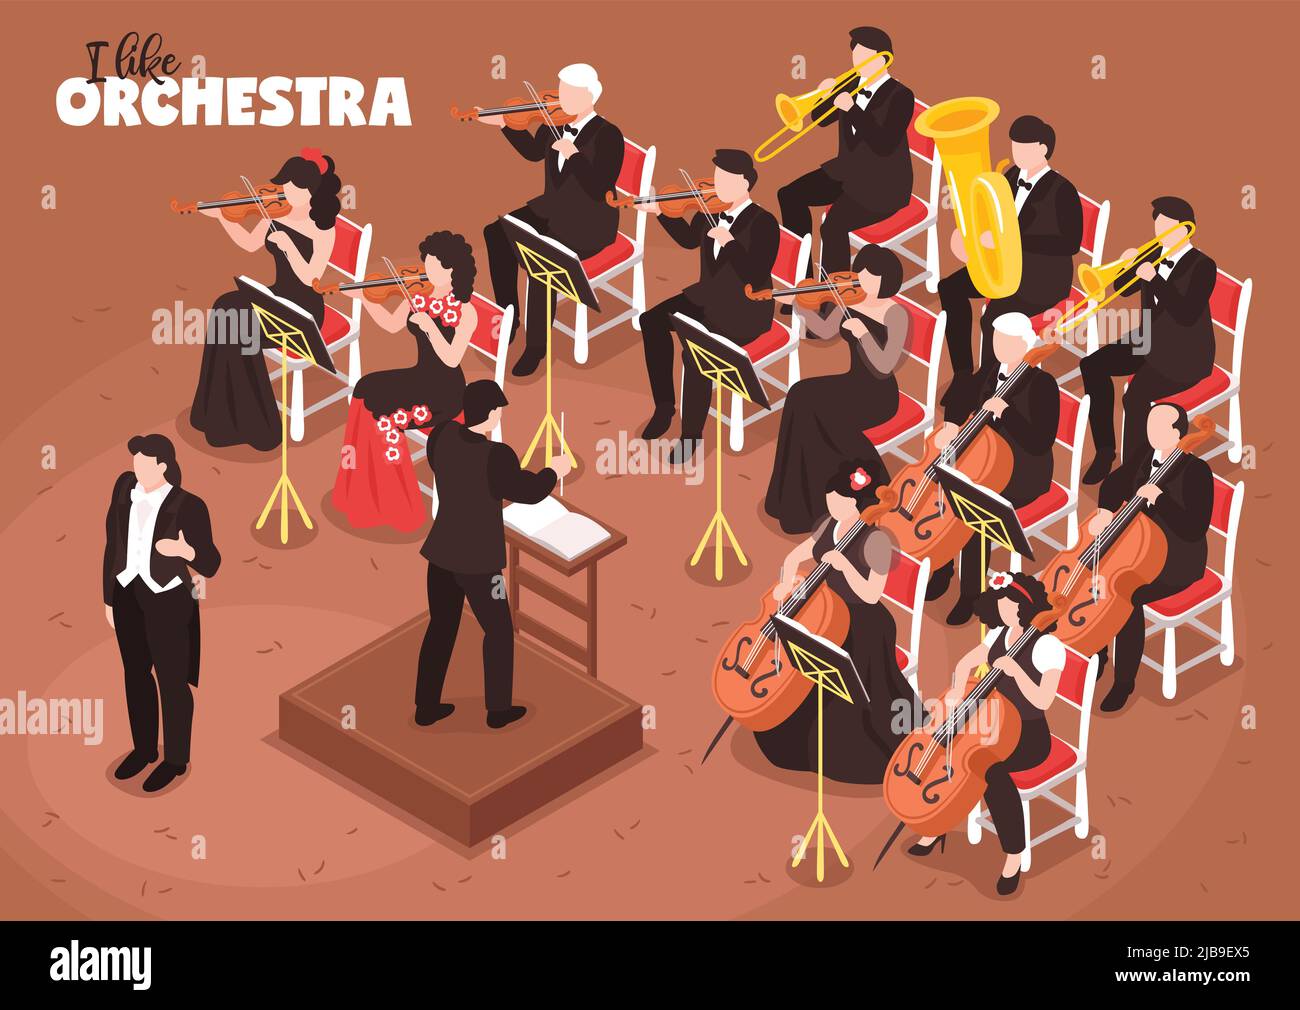 Classical music orchestra isometric composition with singer conductor directing performance violin cello tuba bass players vector illustration Stock Vector